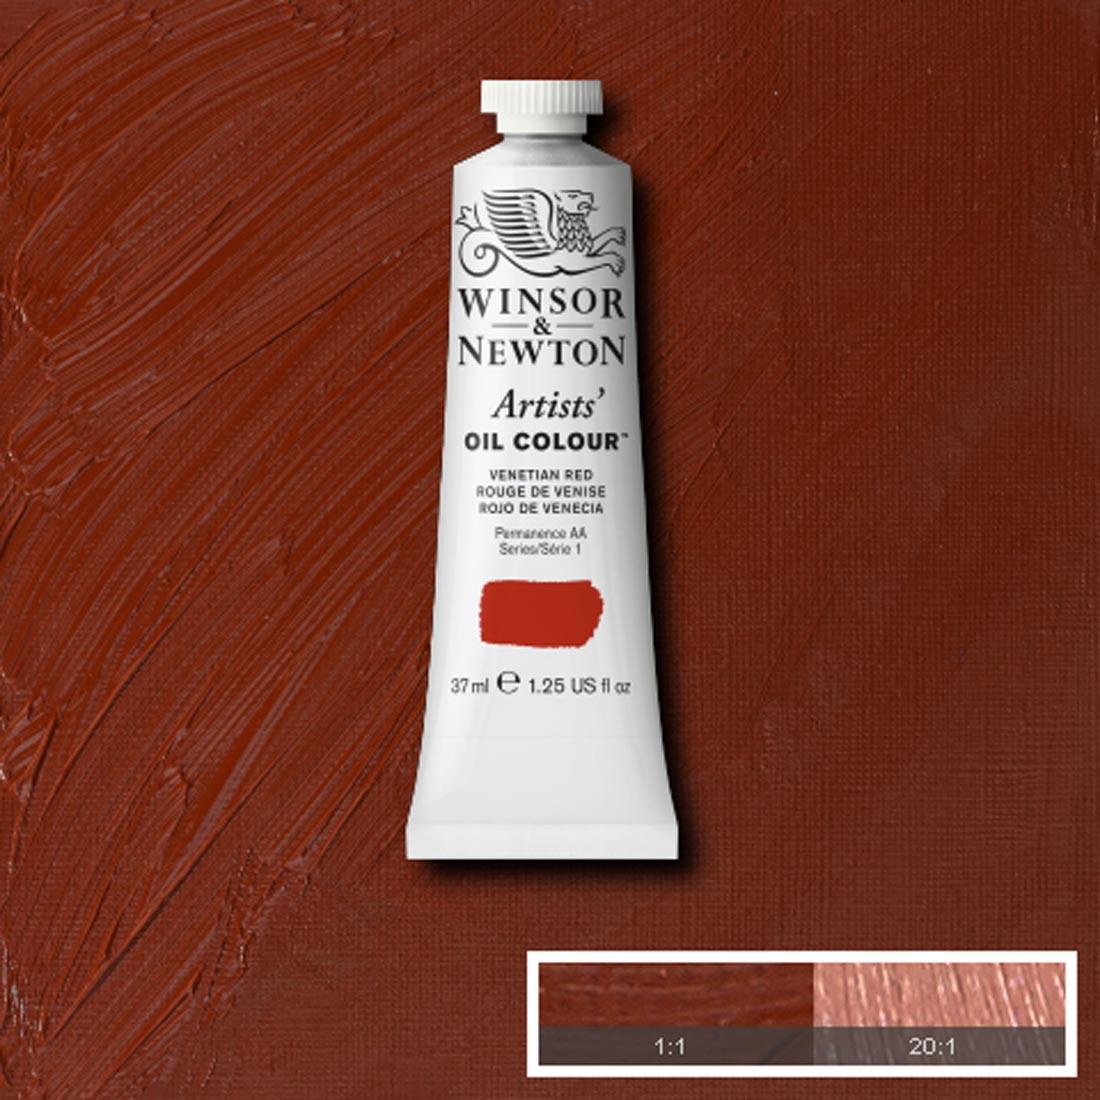 Tube of Venetian Red Winsor & Newton Artists' Oil Colour with a paint swatch for the background